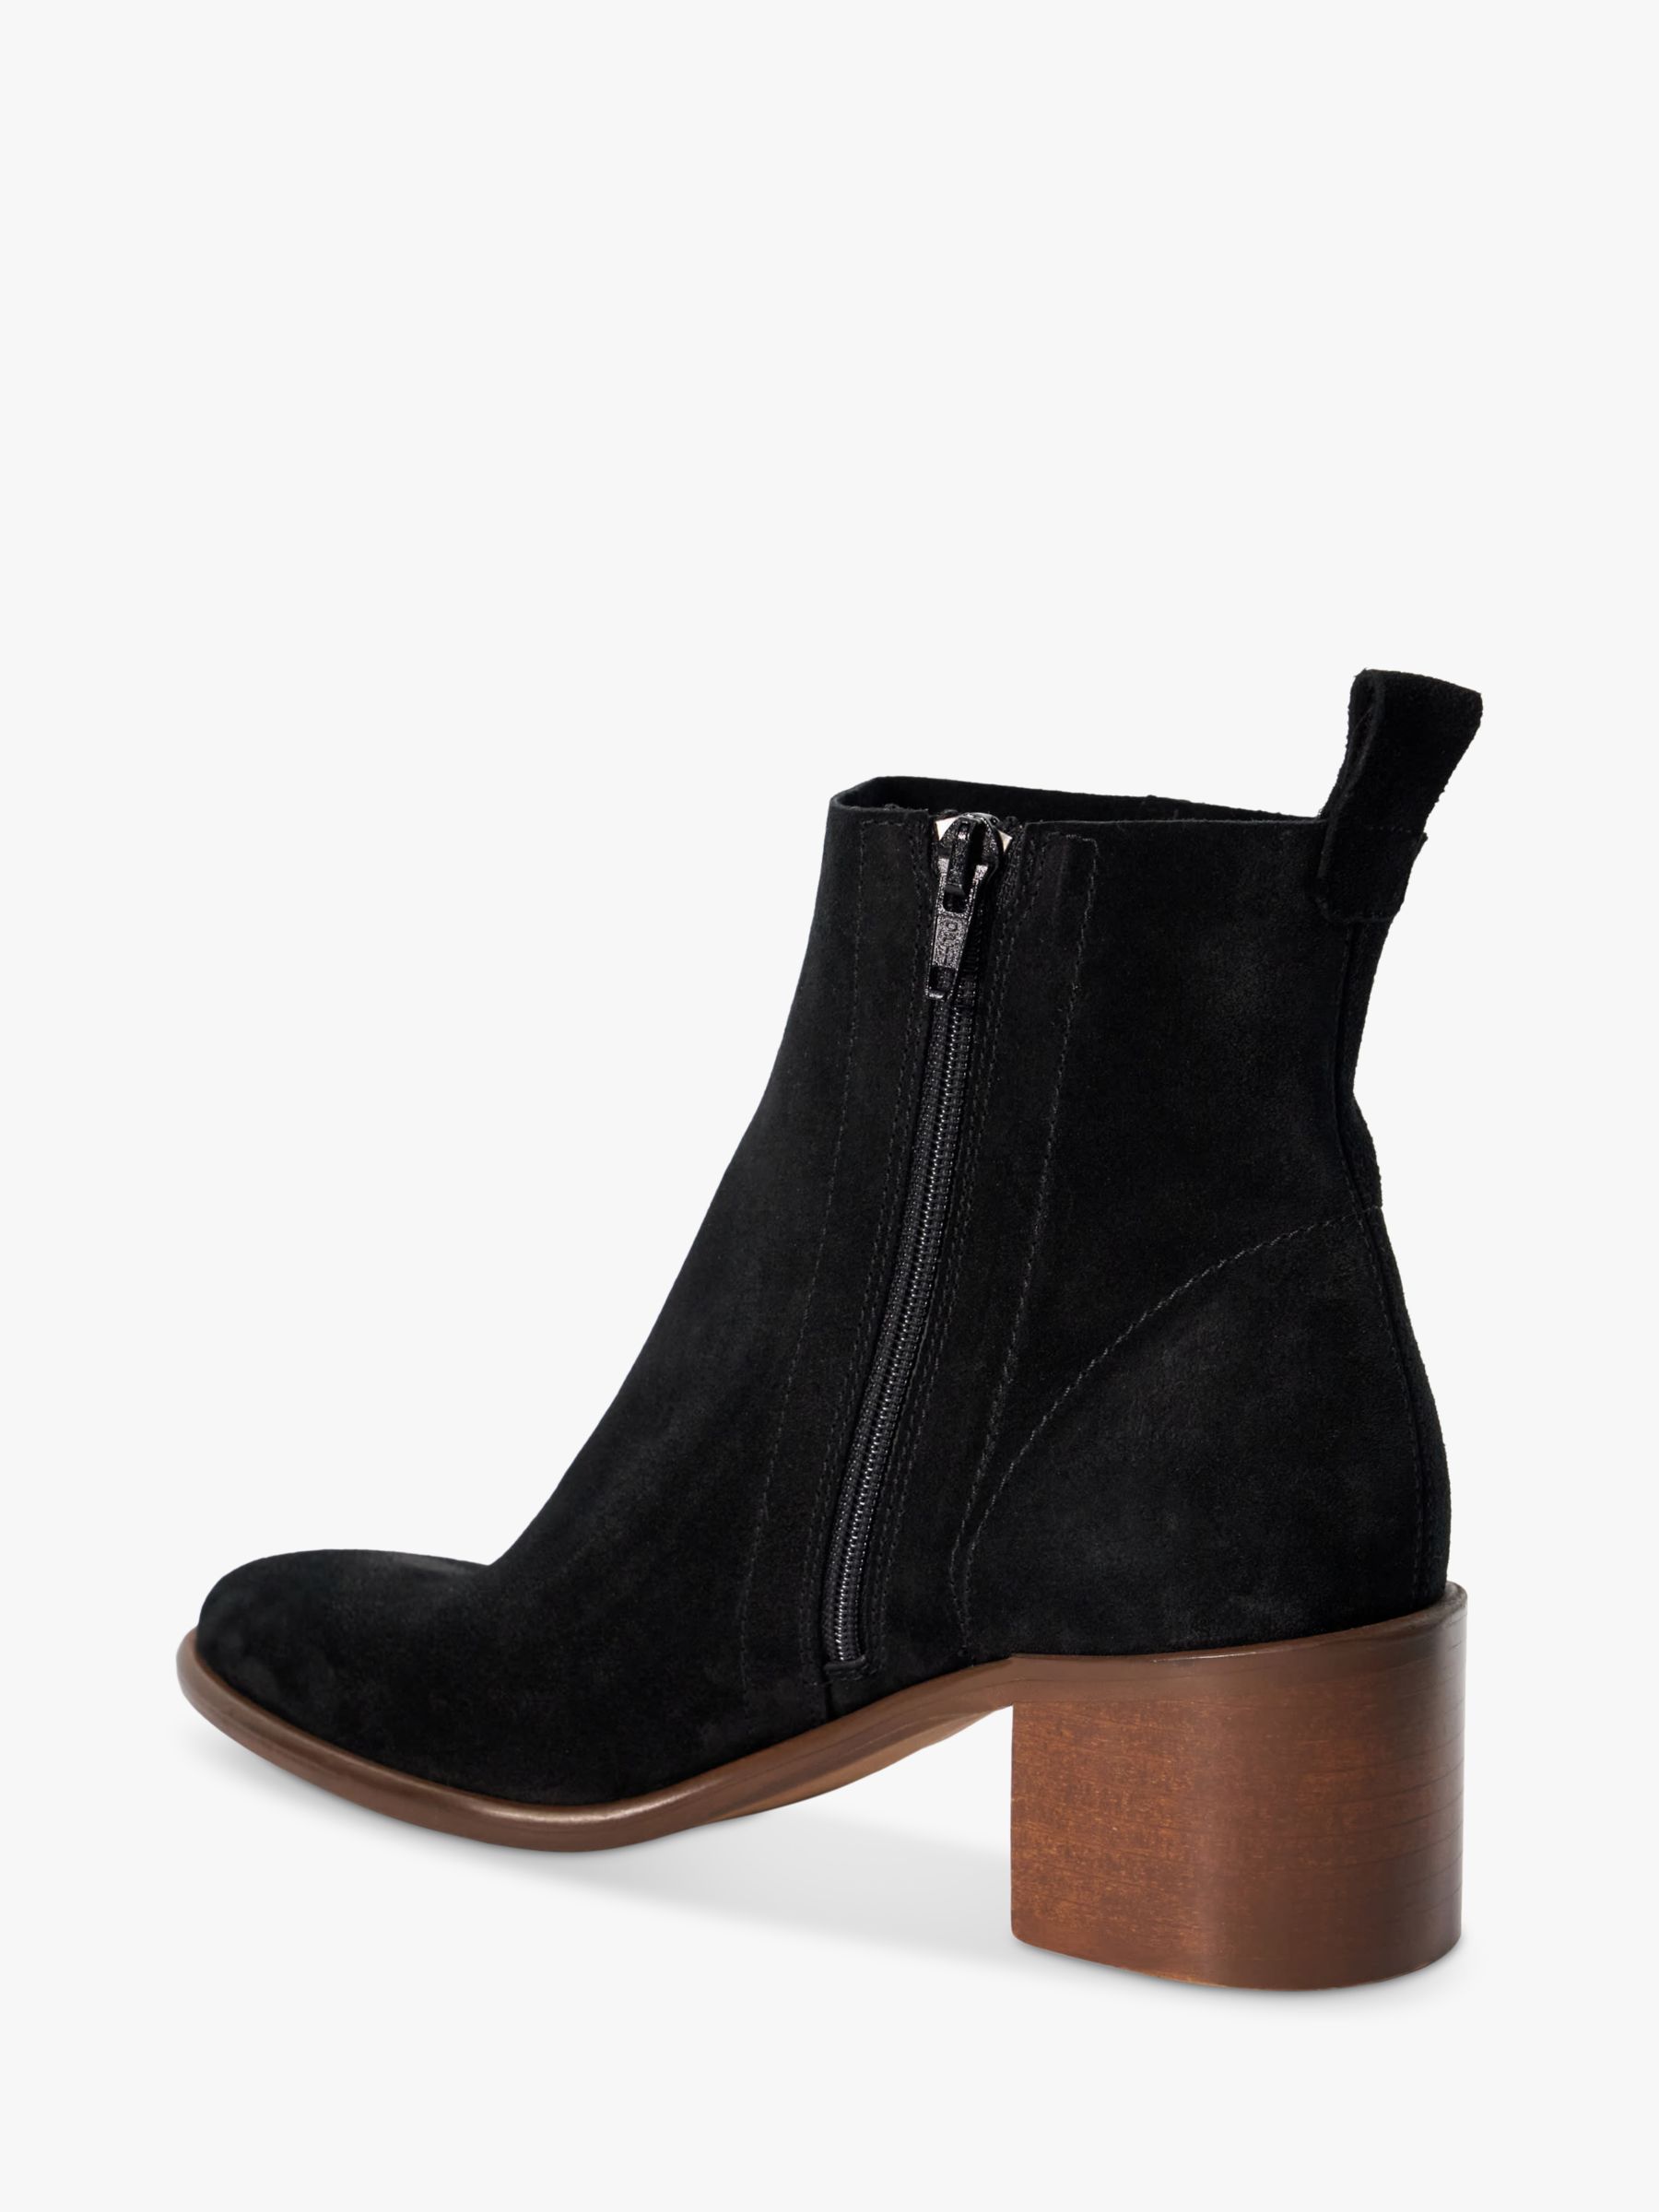 Buy Dune Paprikaa Suede Ankle Boots Online at johnlewis.com